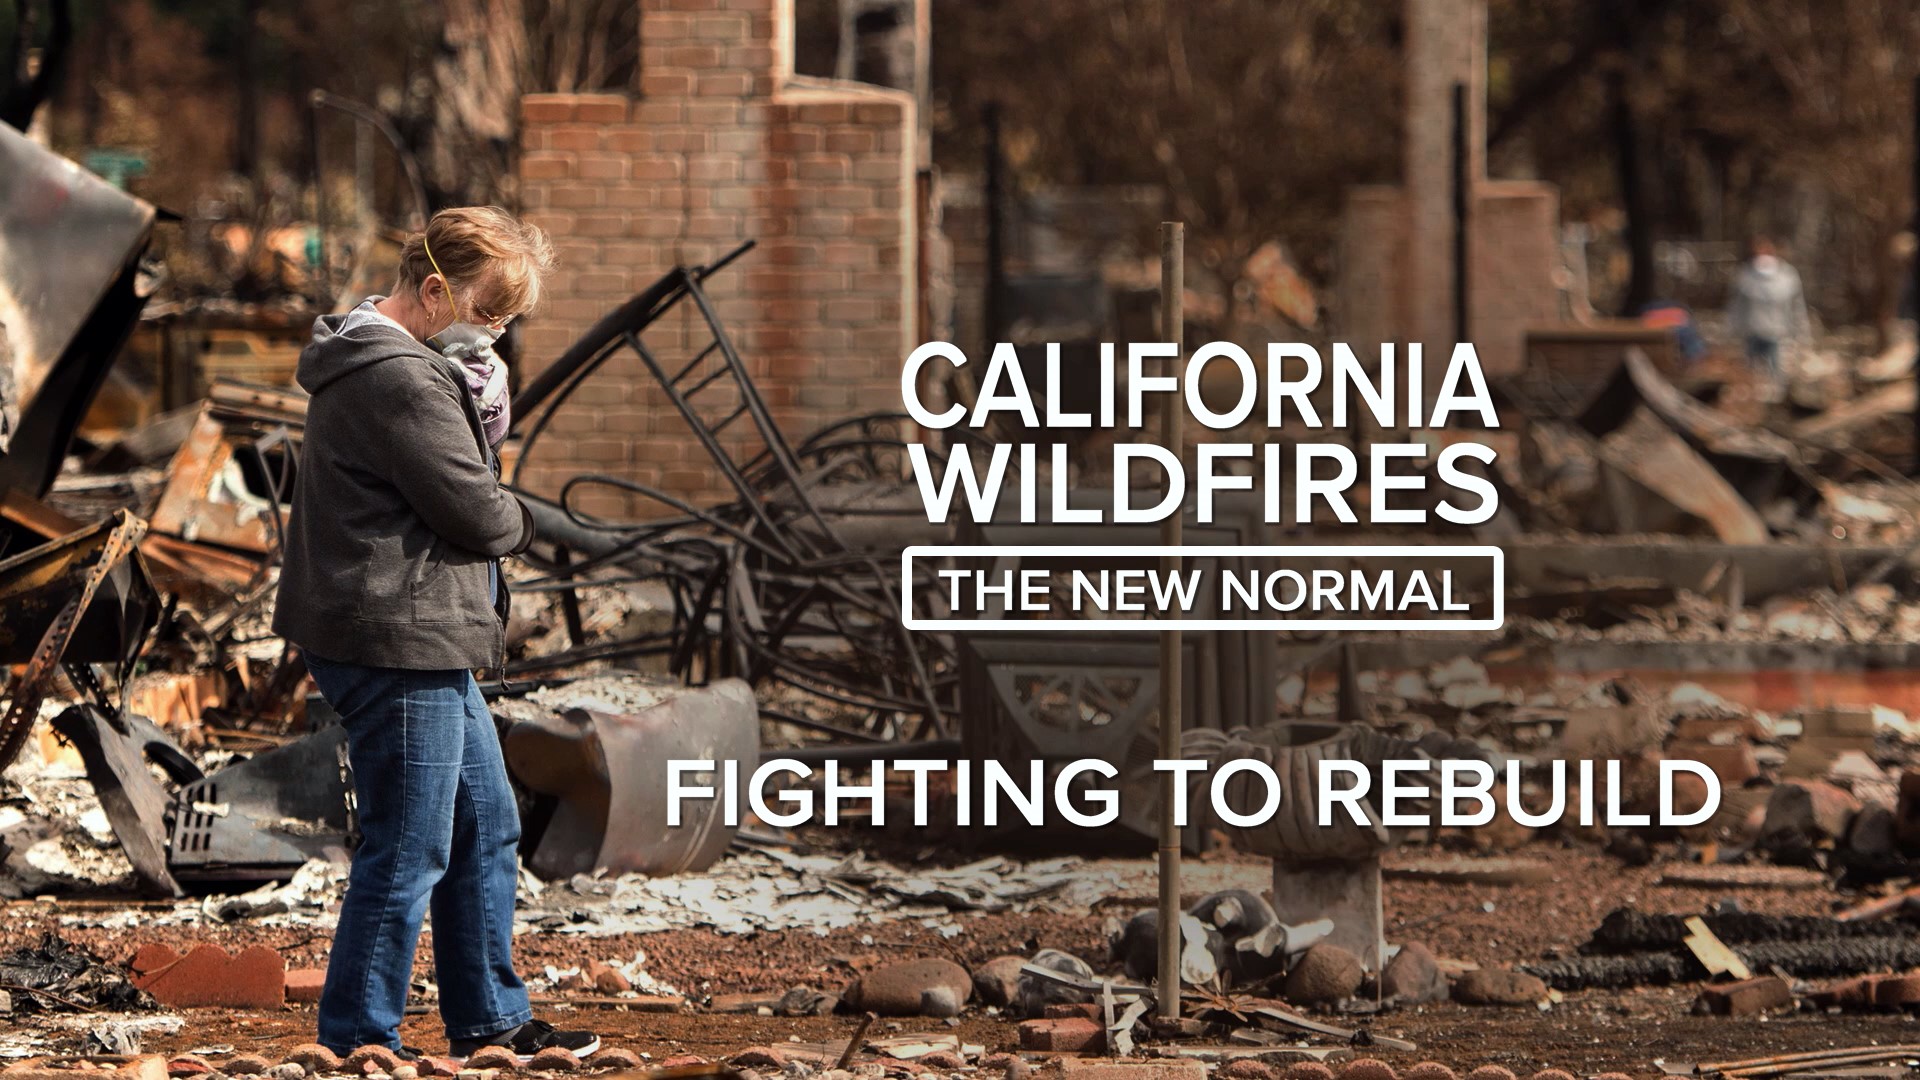 Even with insurance, the road to recovery from losing everything to a wildfire can be a long one. Over a year later, residents of the Coffey Park neighborhood in Santa Rosa are still fighting to rebuild their lives.